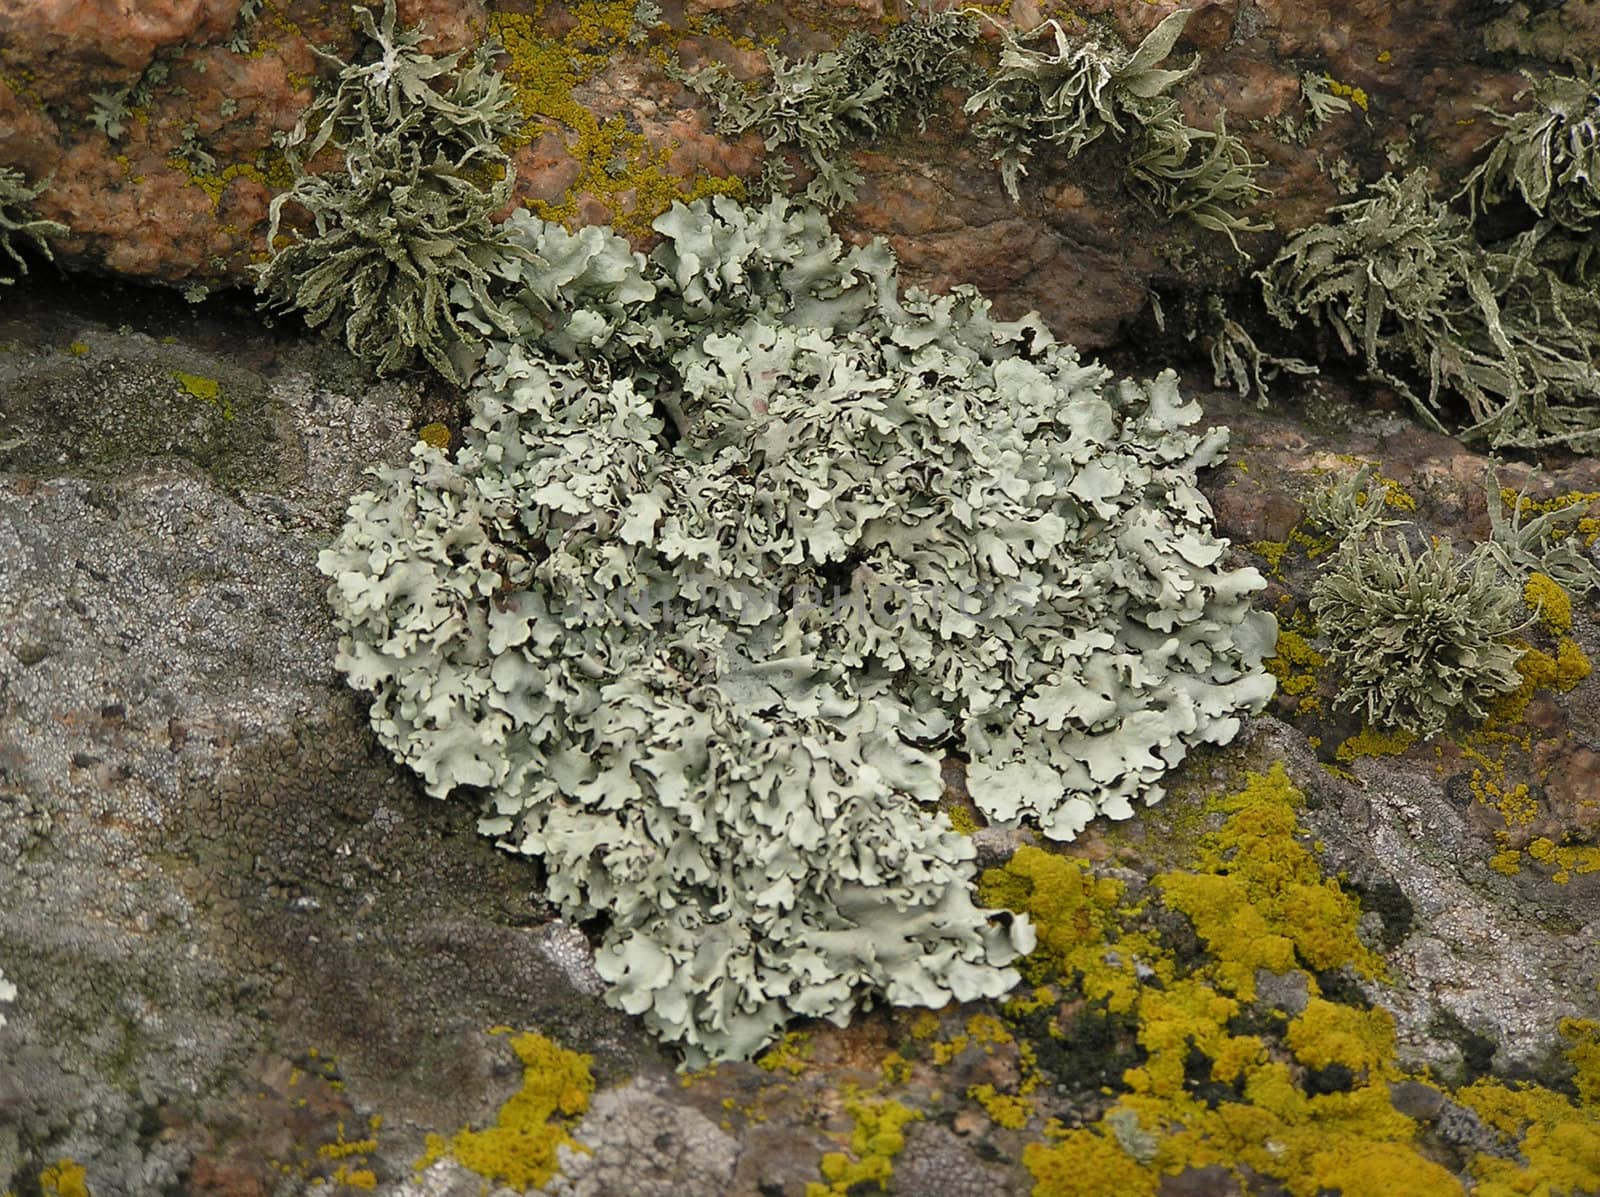 Background on which the lichen growing on a granite is represented